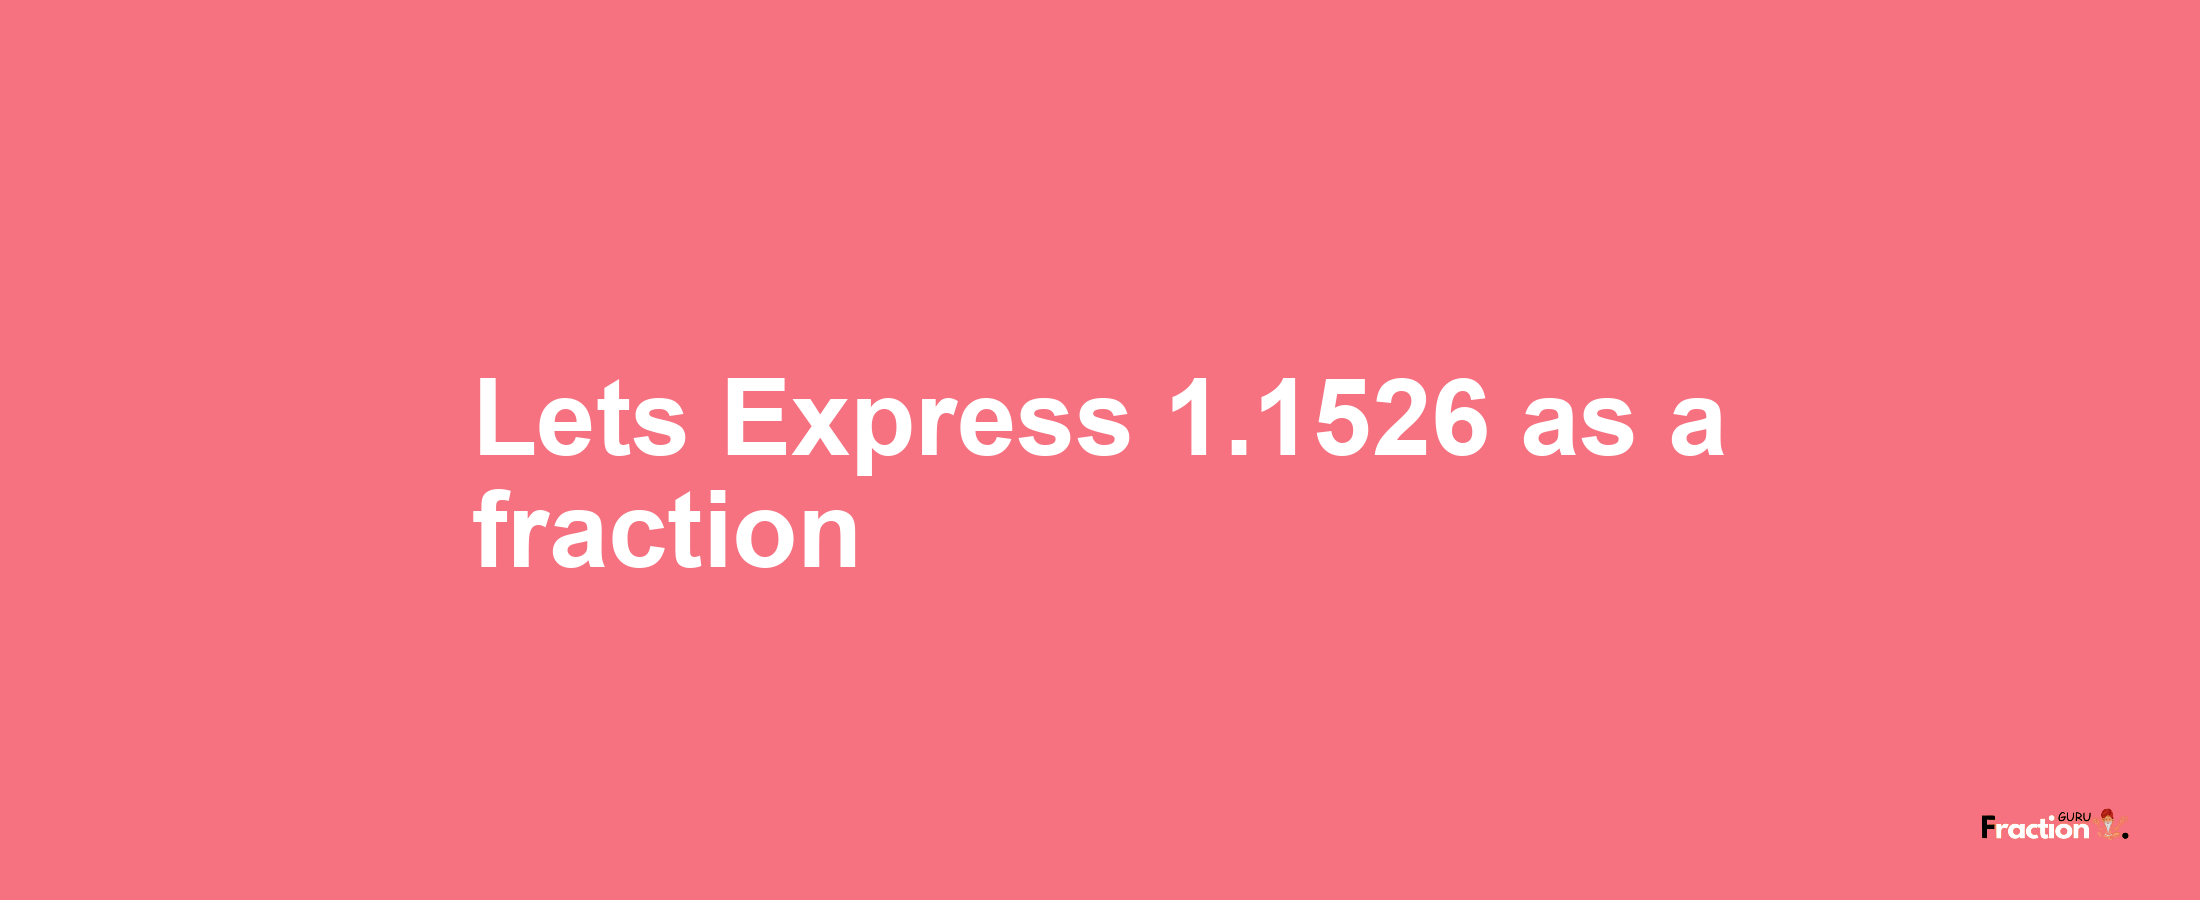 Lets Express 1.1526 as afraction